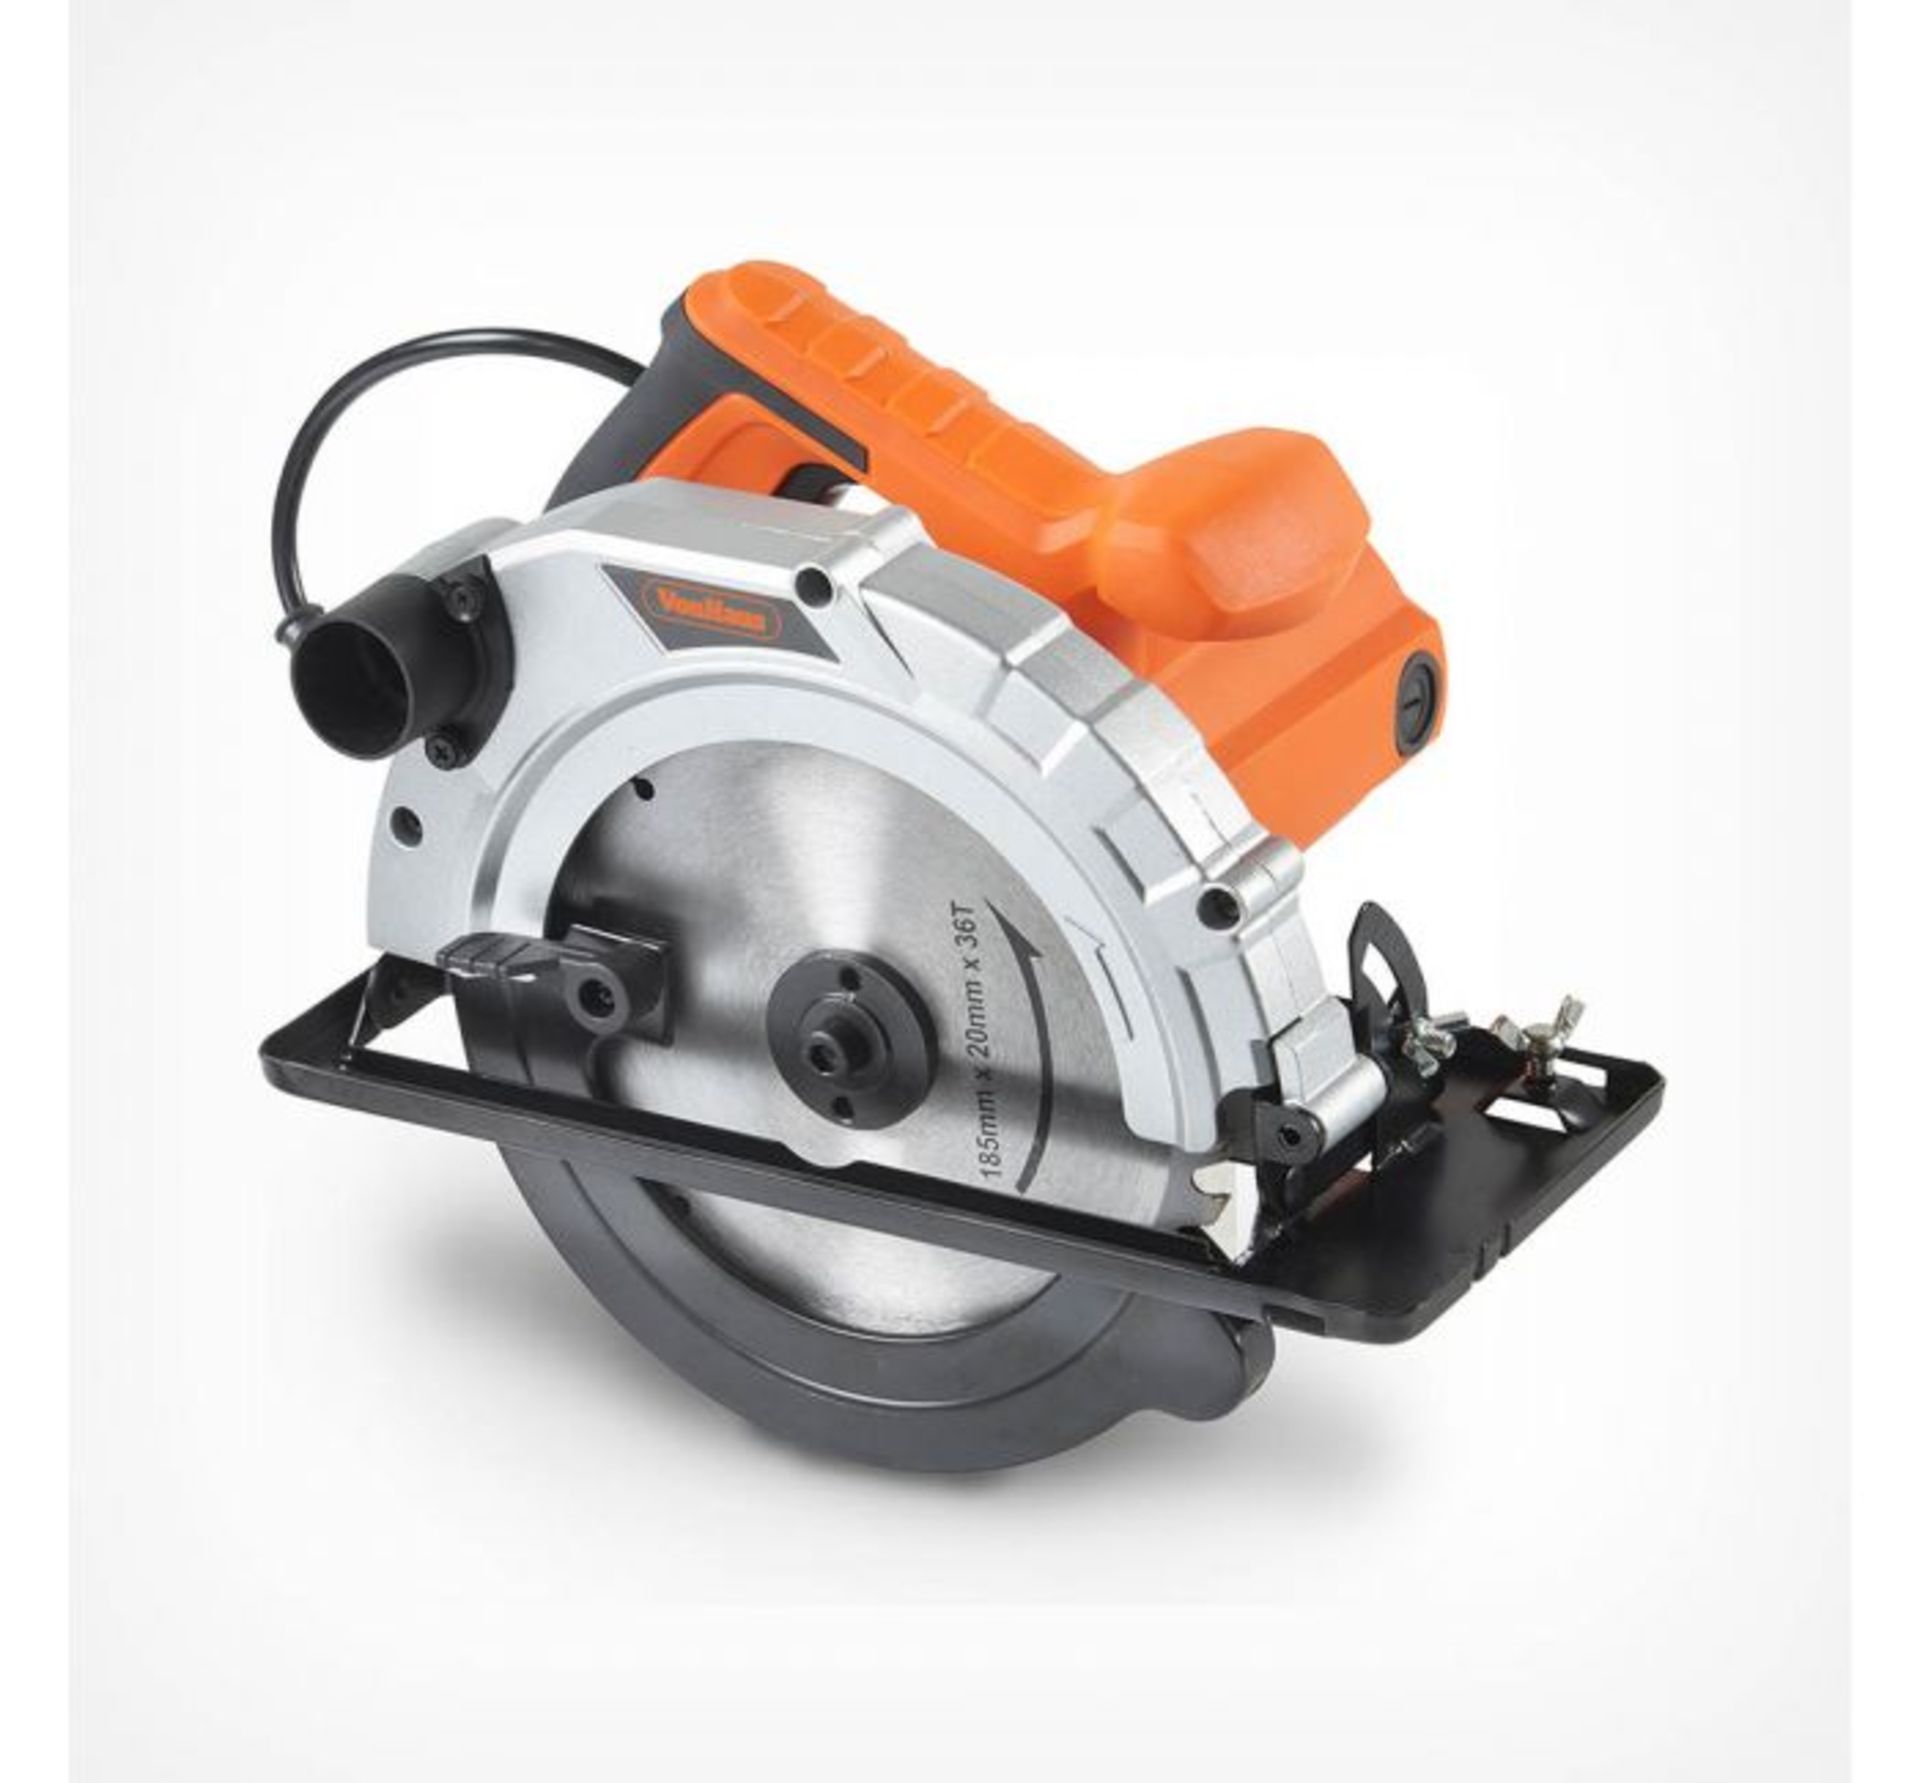 (WK23) 185mm Circular Saw Powerful 1200W input Multiple bevel angle settings for joint cuts ...